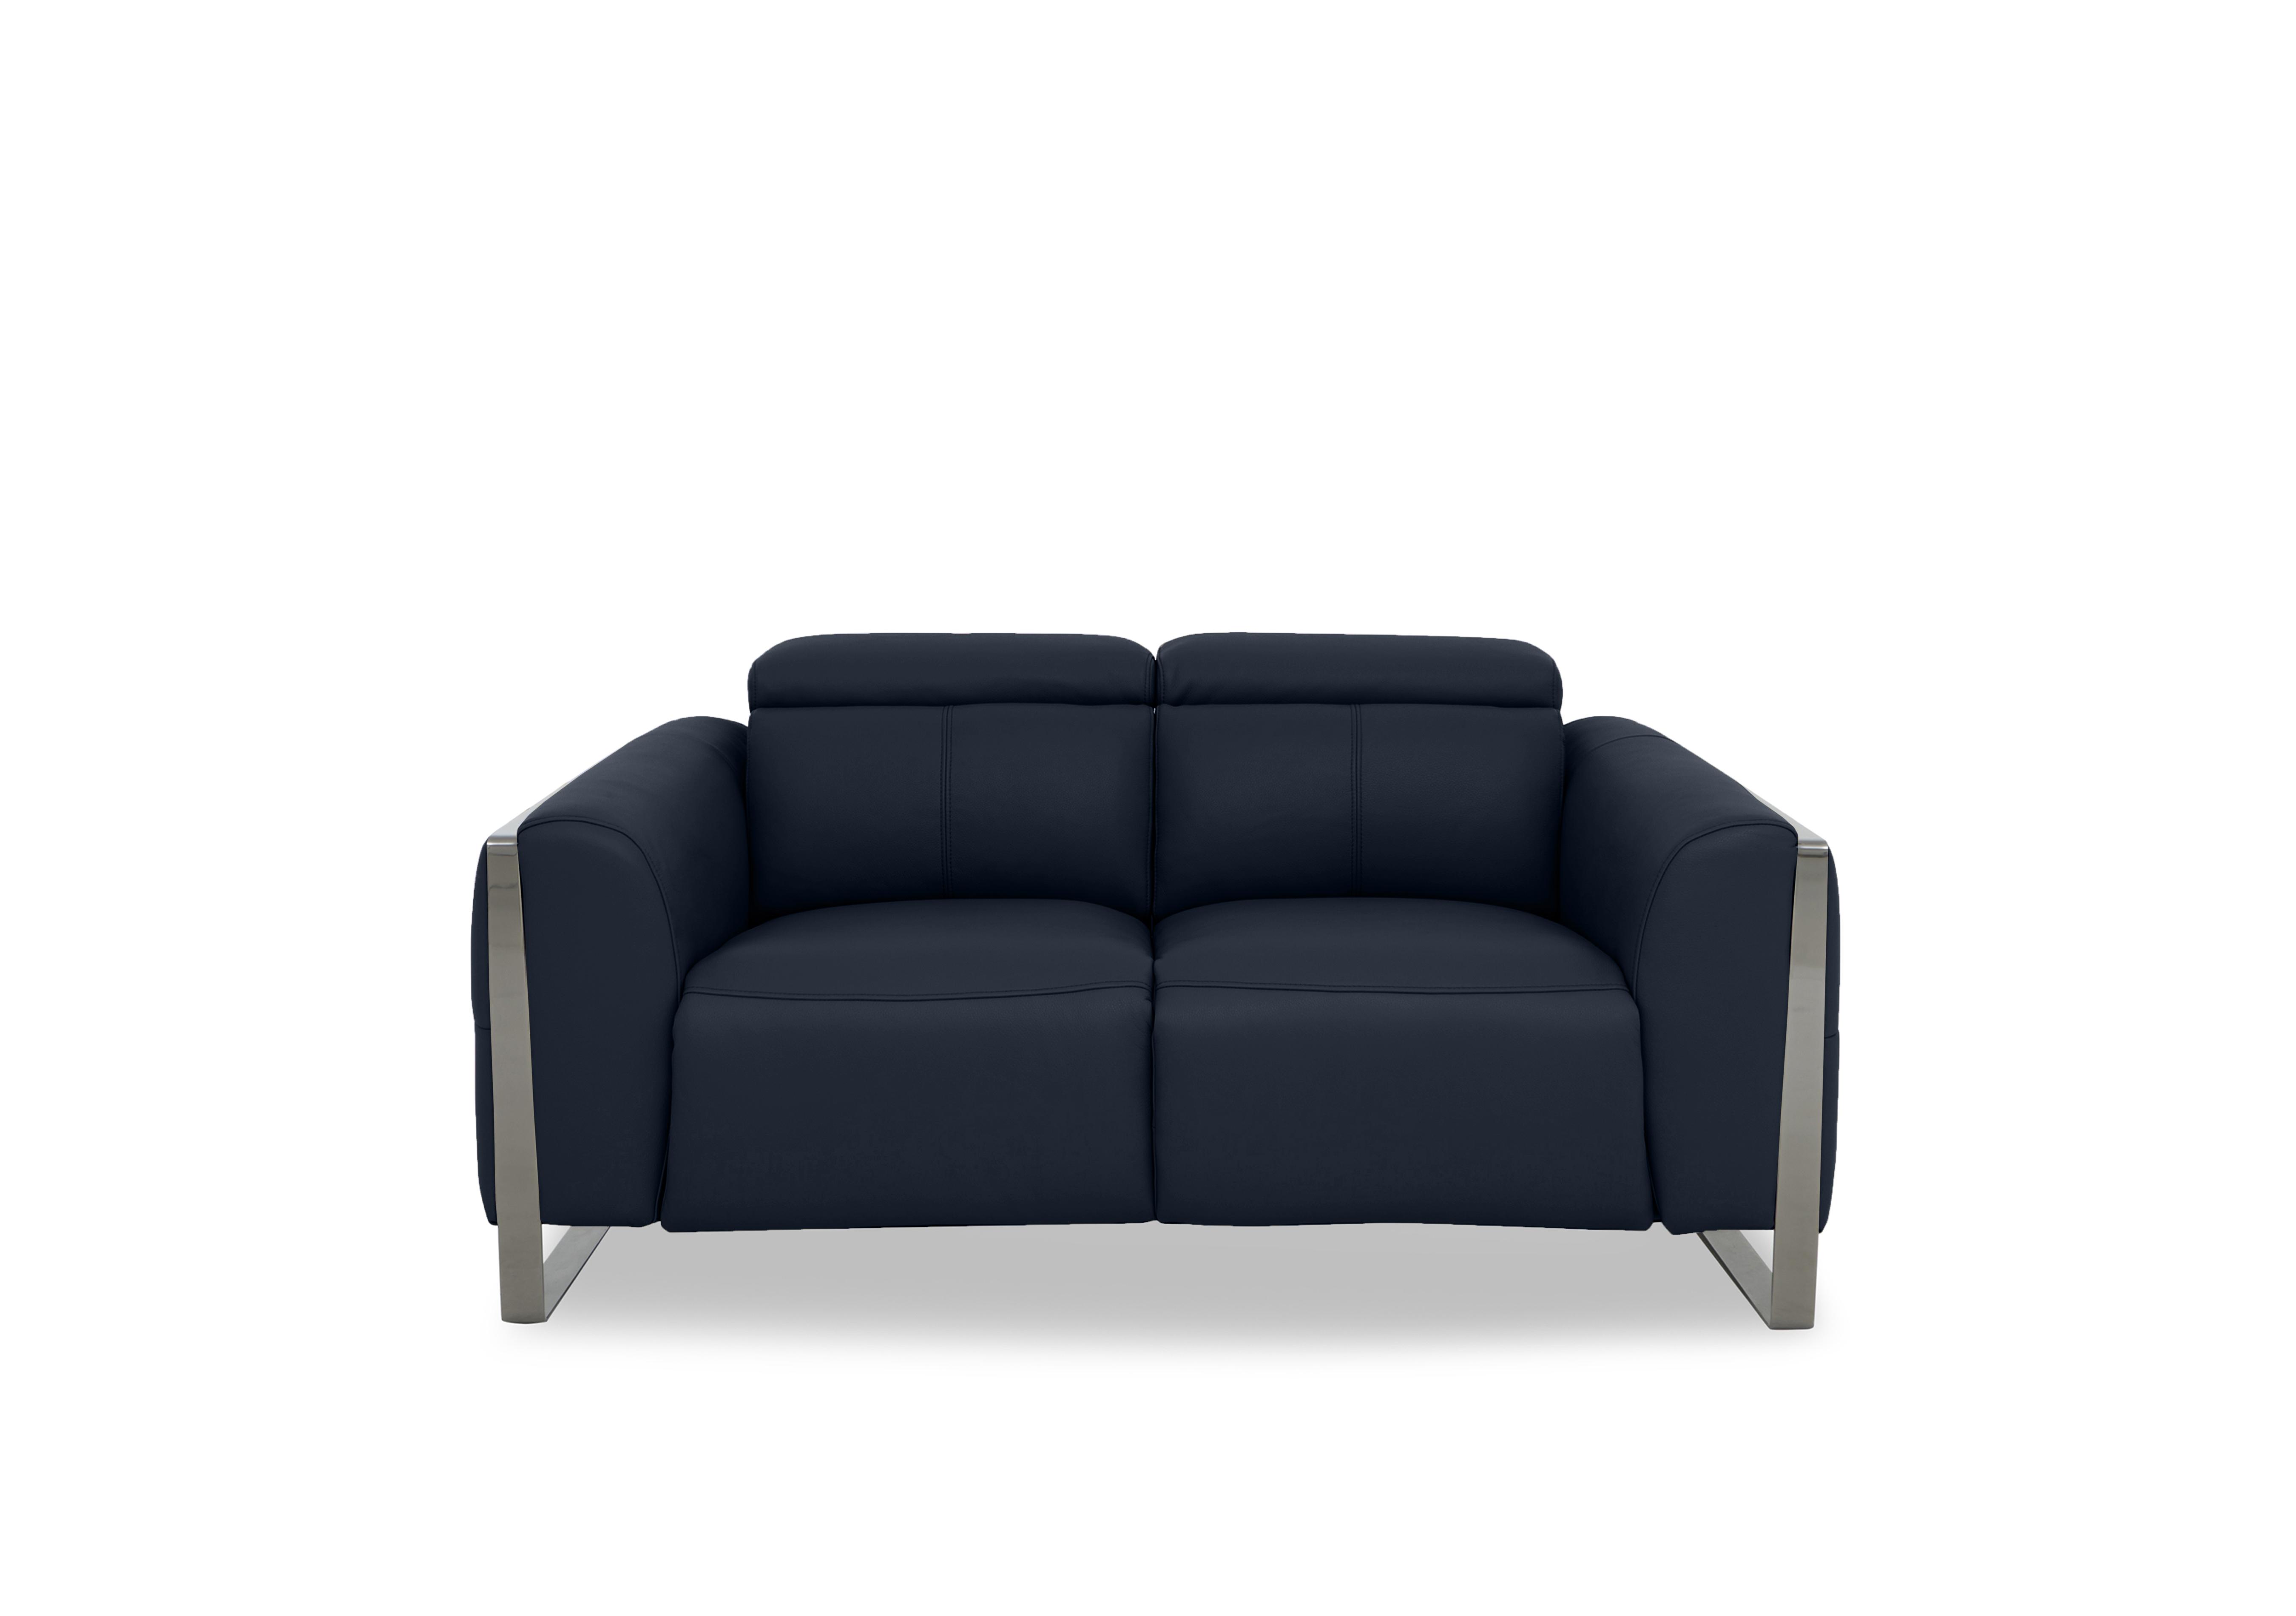 Gisella Leather 2 Seater Sofa in Cat-40/09 Peacock on Furniture Village